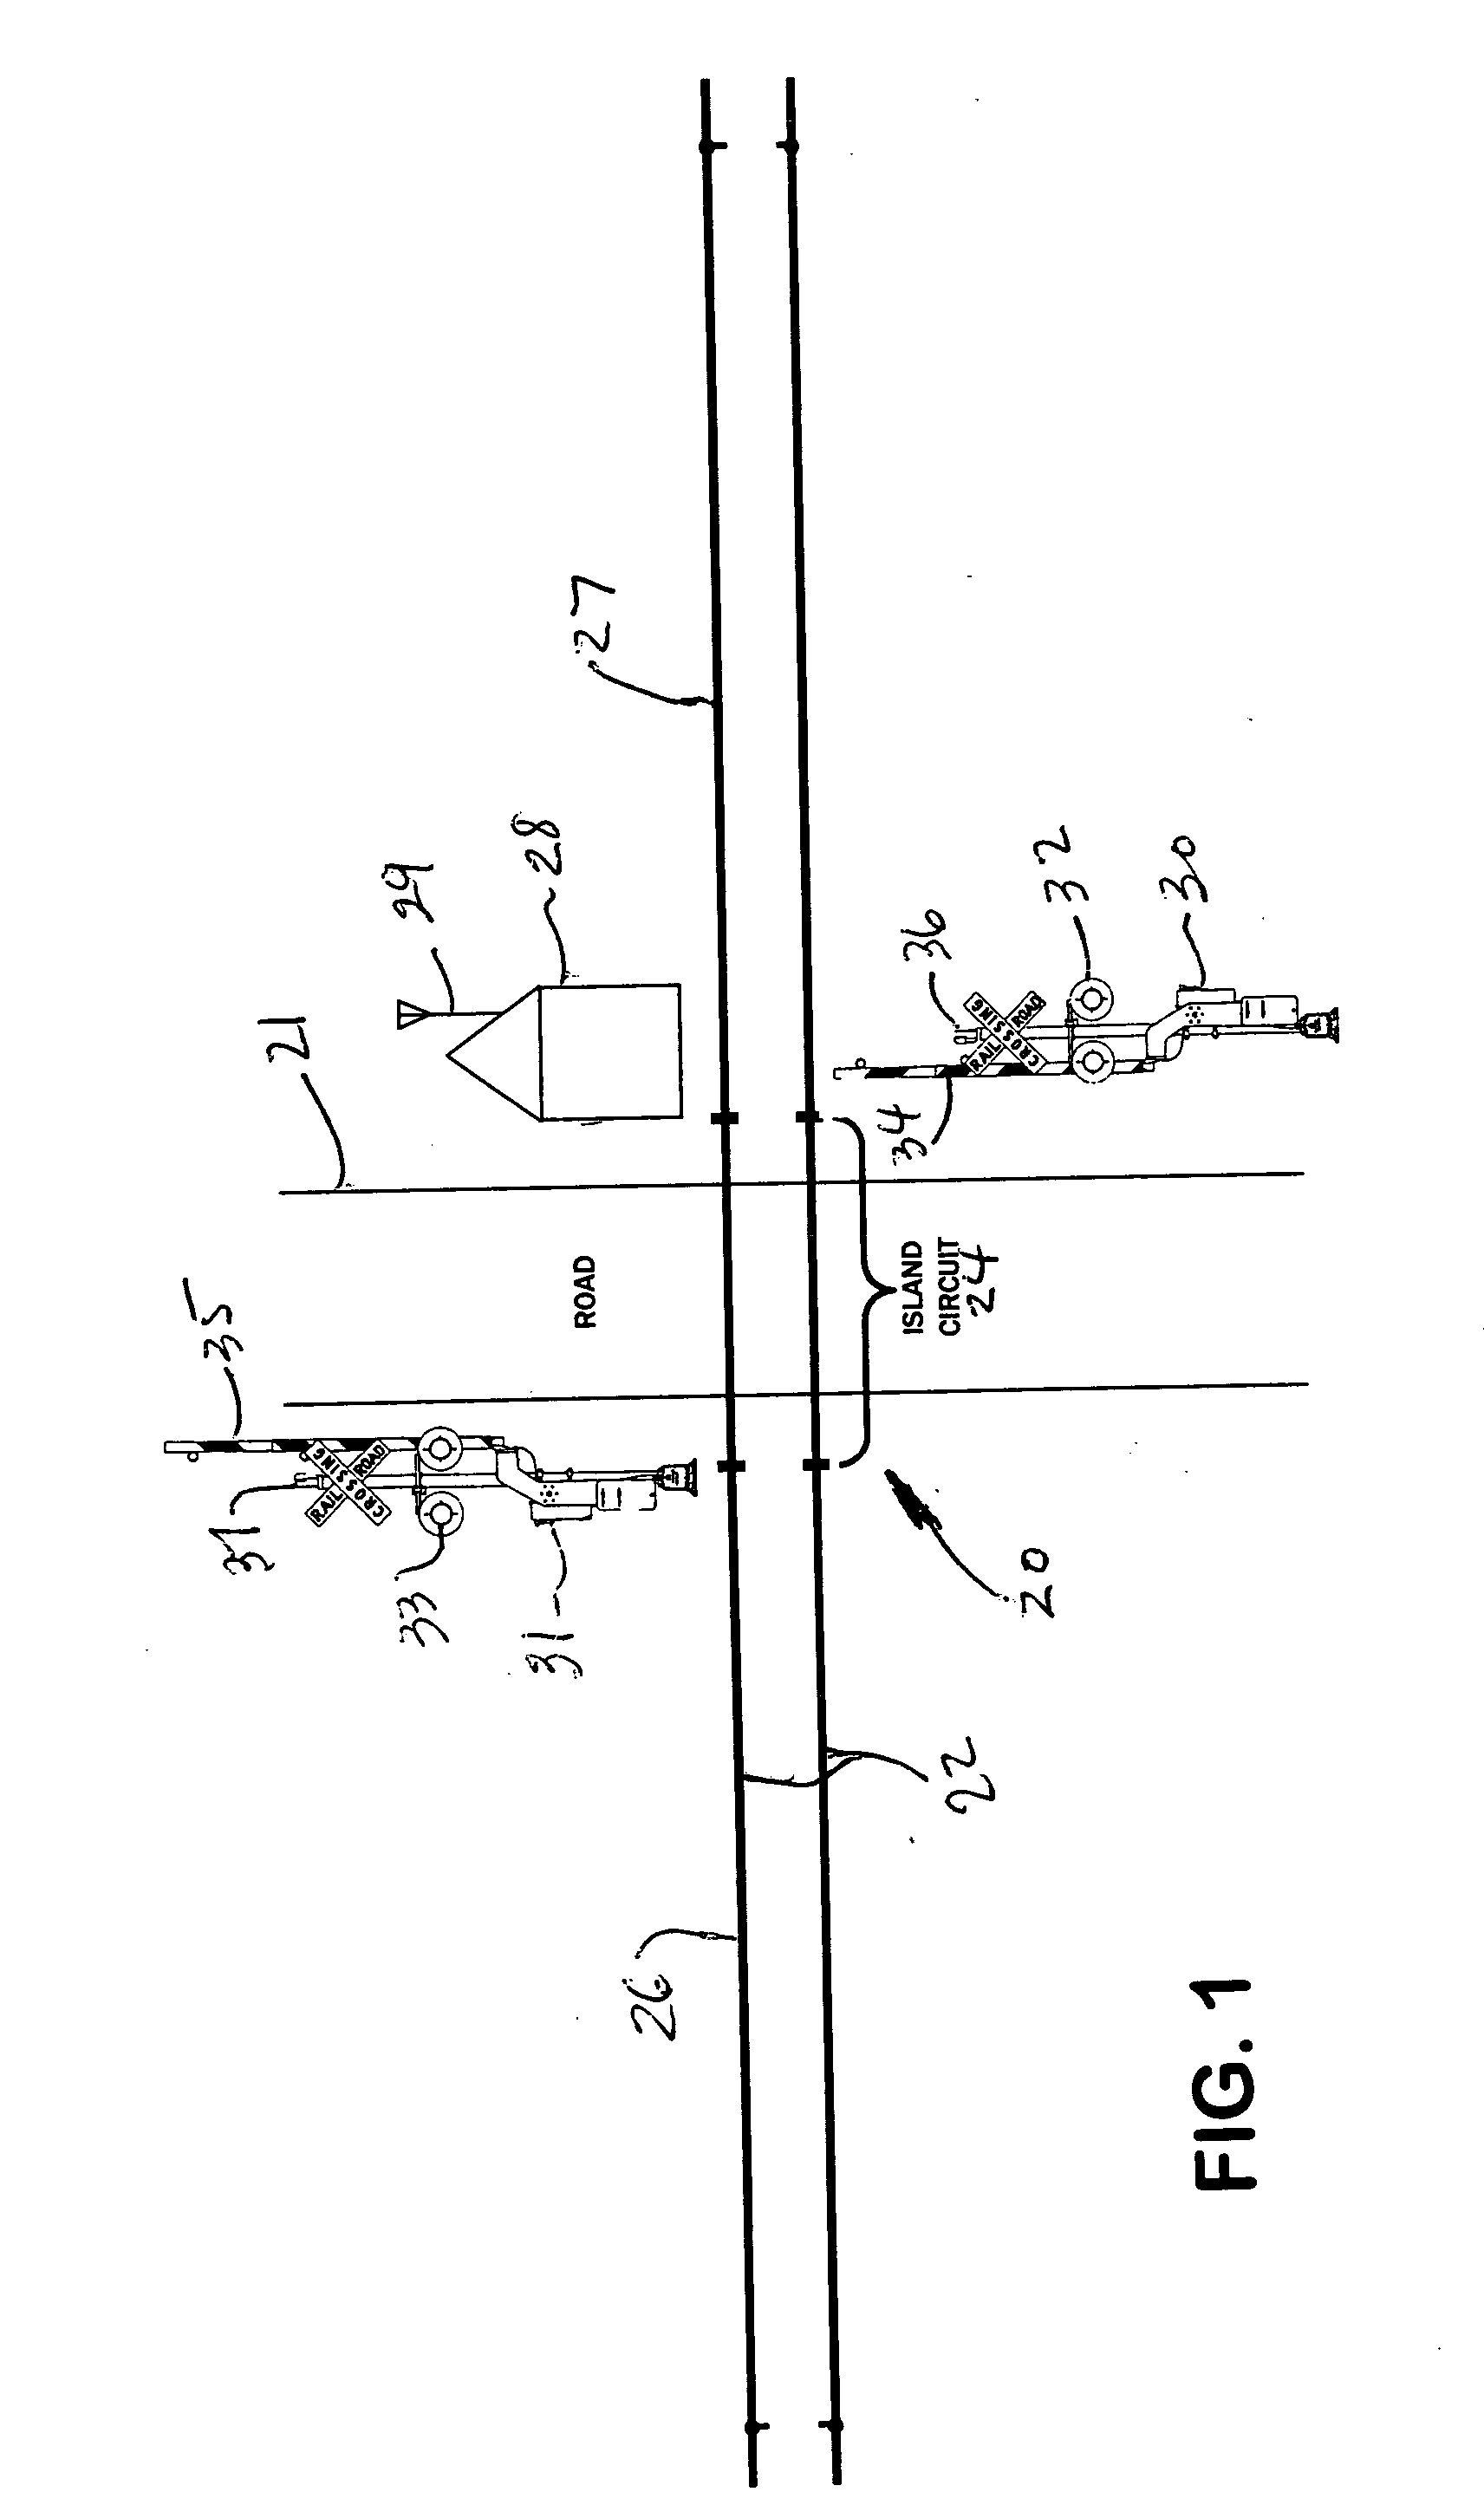 Highway-rail grade crossing controller with out of service mode